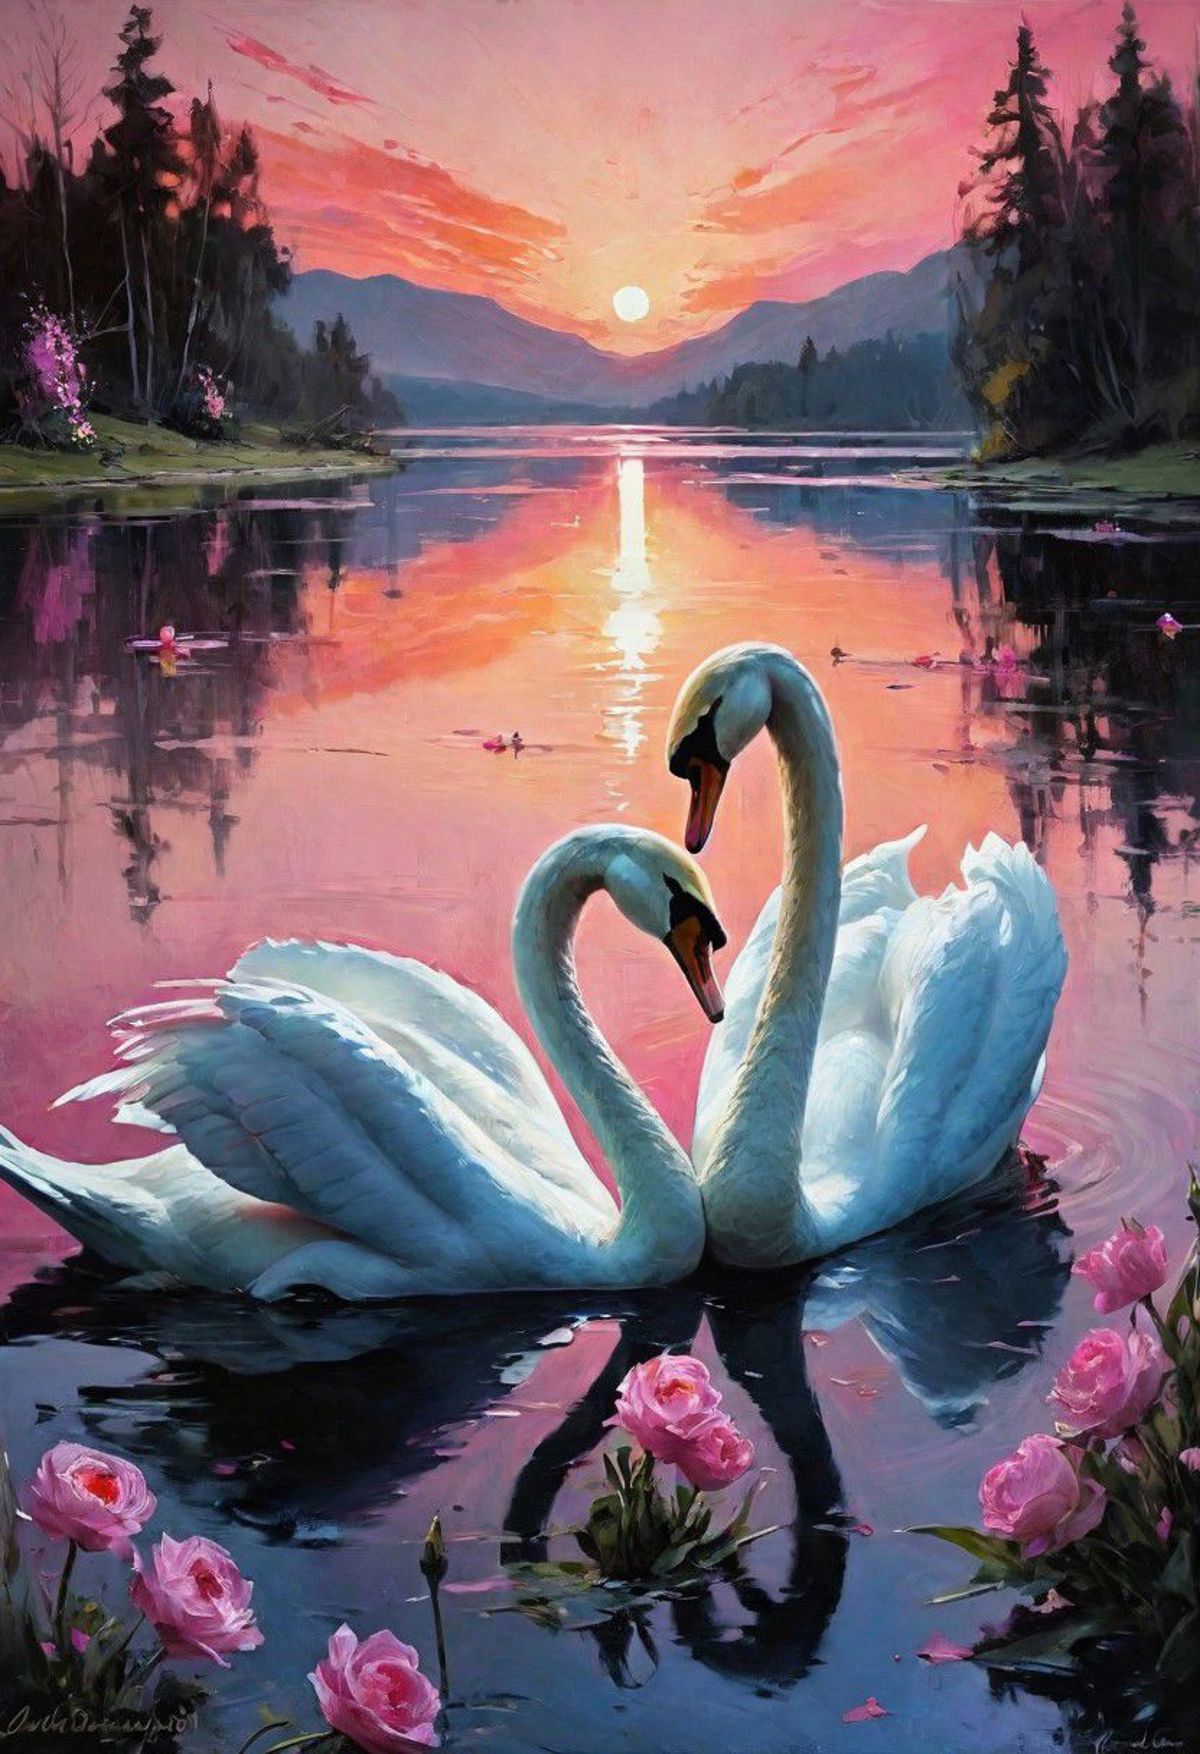 A serene scene of two white swans swimming together in a lake at sunset, surrounded by pink flowers.